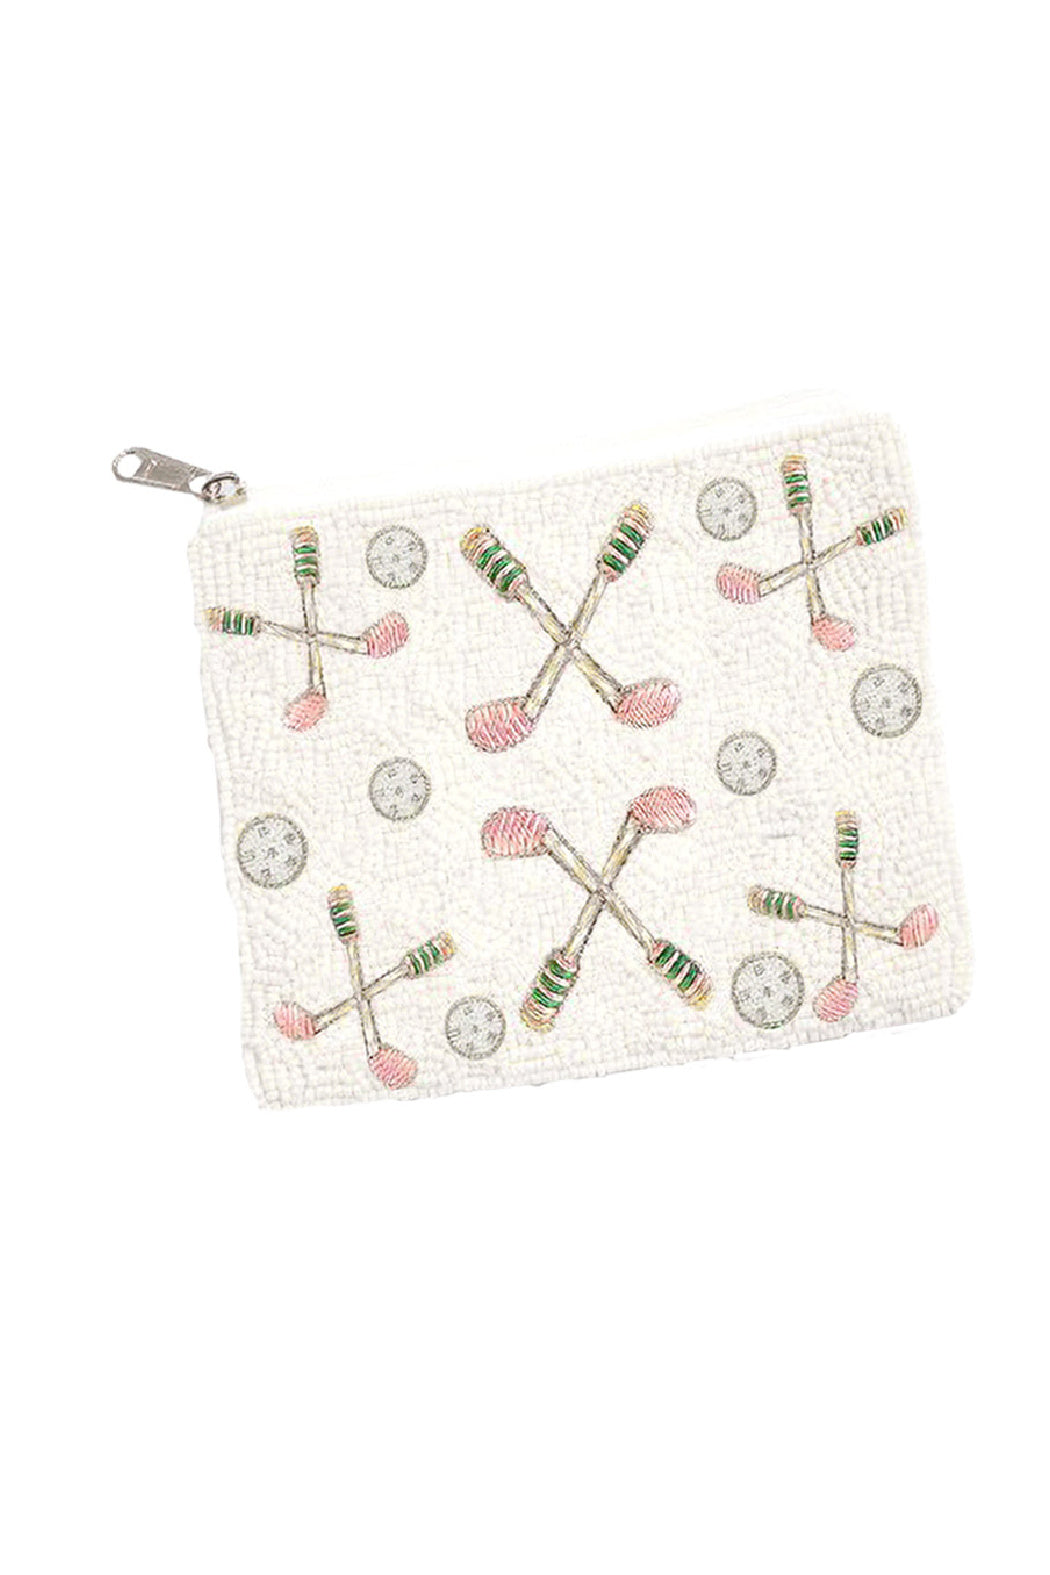 Clubs and Balls Beaded Pouch